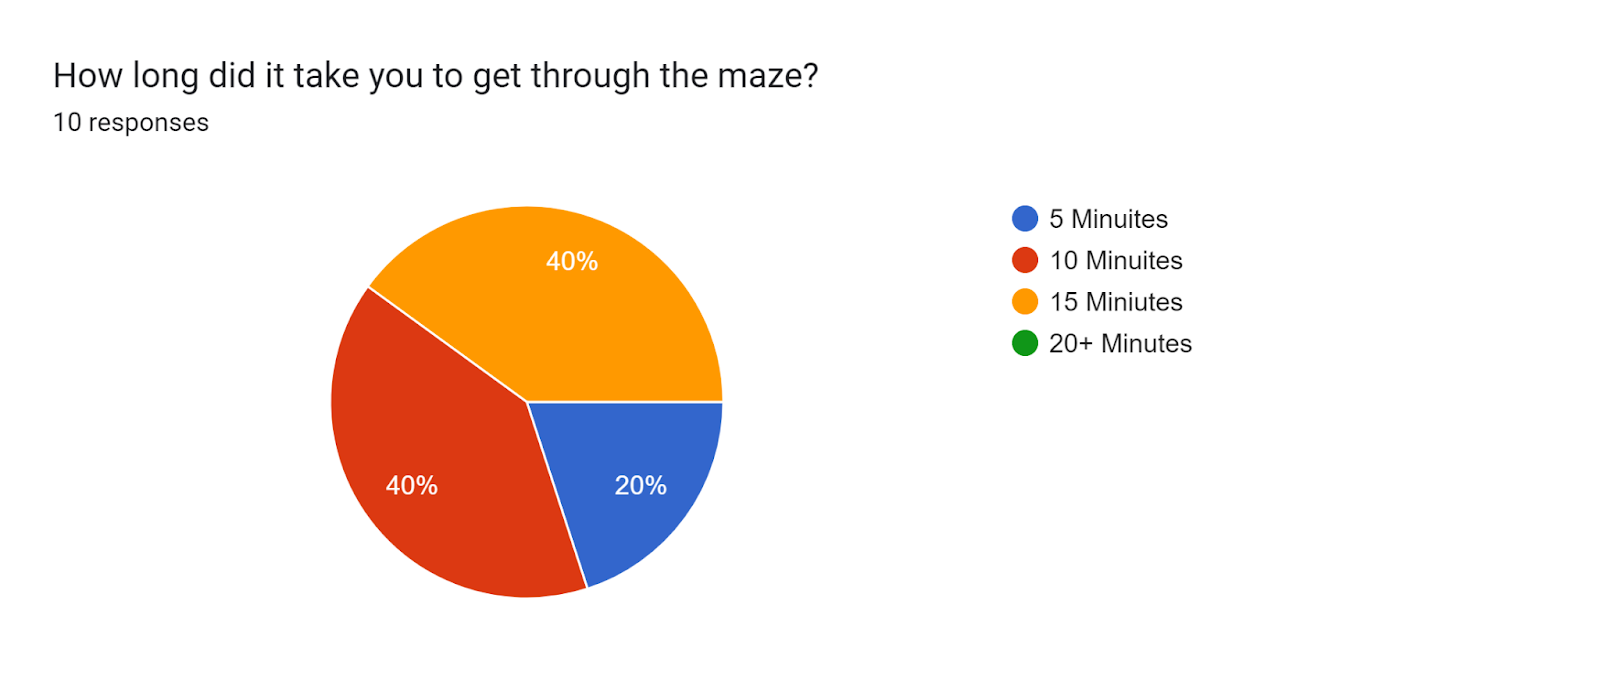 Forms response chart. Question title: How long did it take you to get through the maze?. Number of responses: 10 responses.